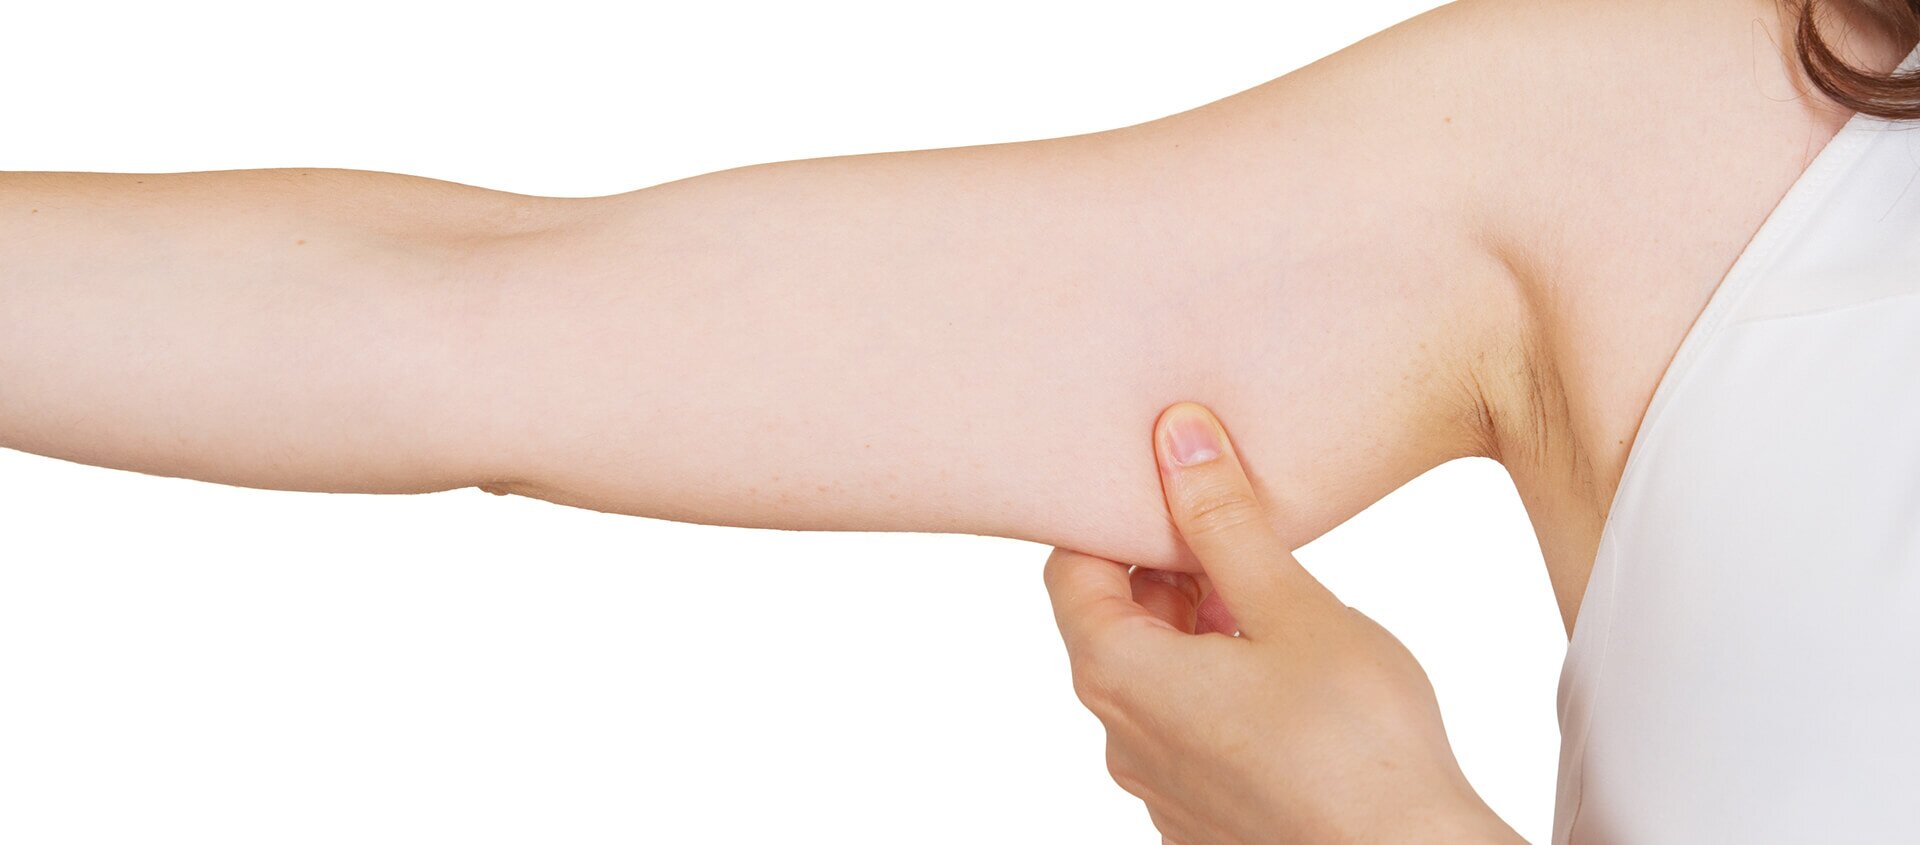 Mark H. Tseng, M.D. Blog | The skinny on fat reduction for arms with liposuction and alternatives in Kirkland, WA